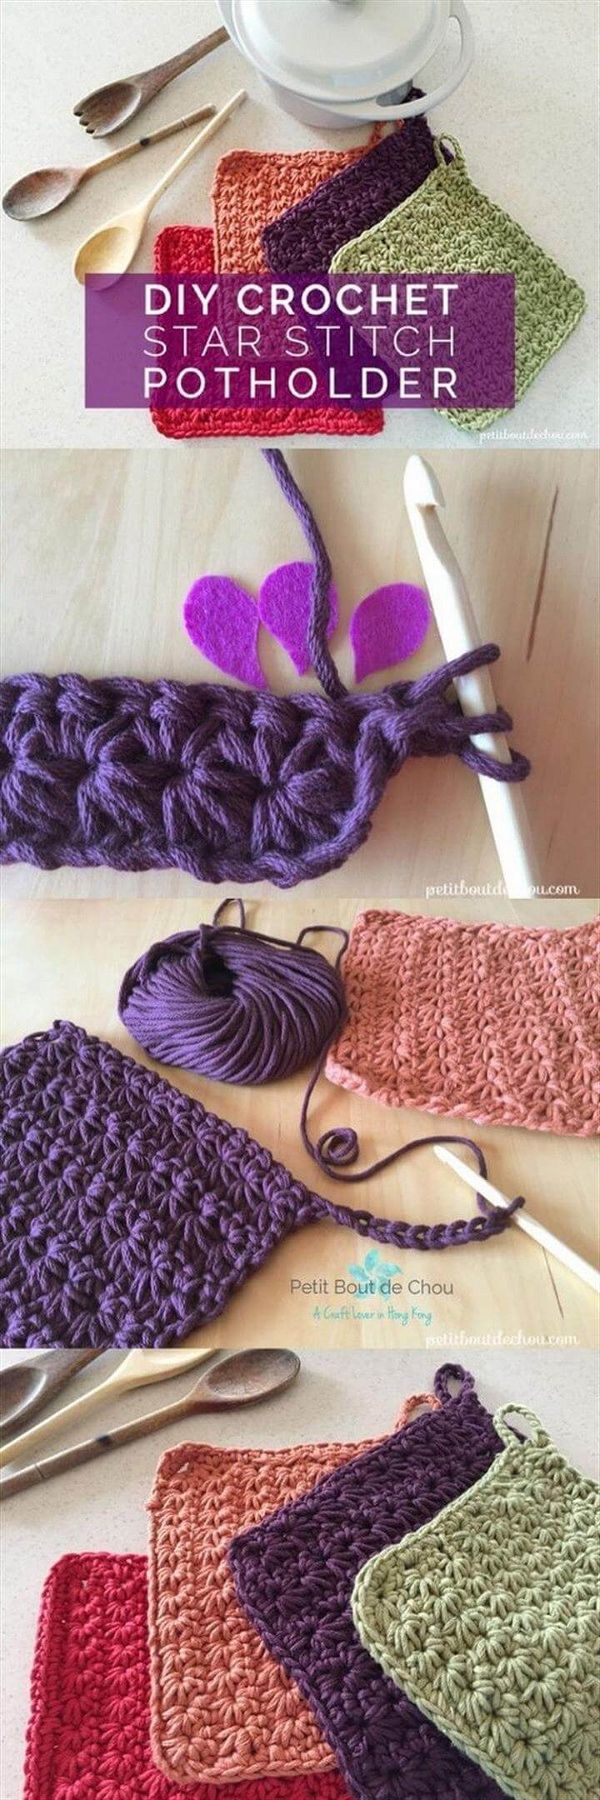 Mother's Day Crafts and gifts: DIY Crochet Star Stitch Potholder.